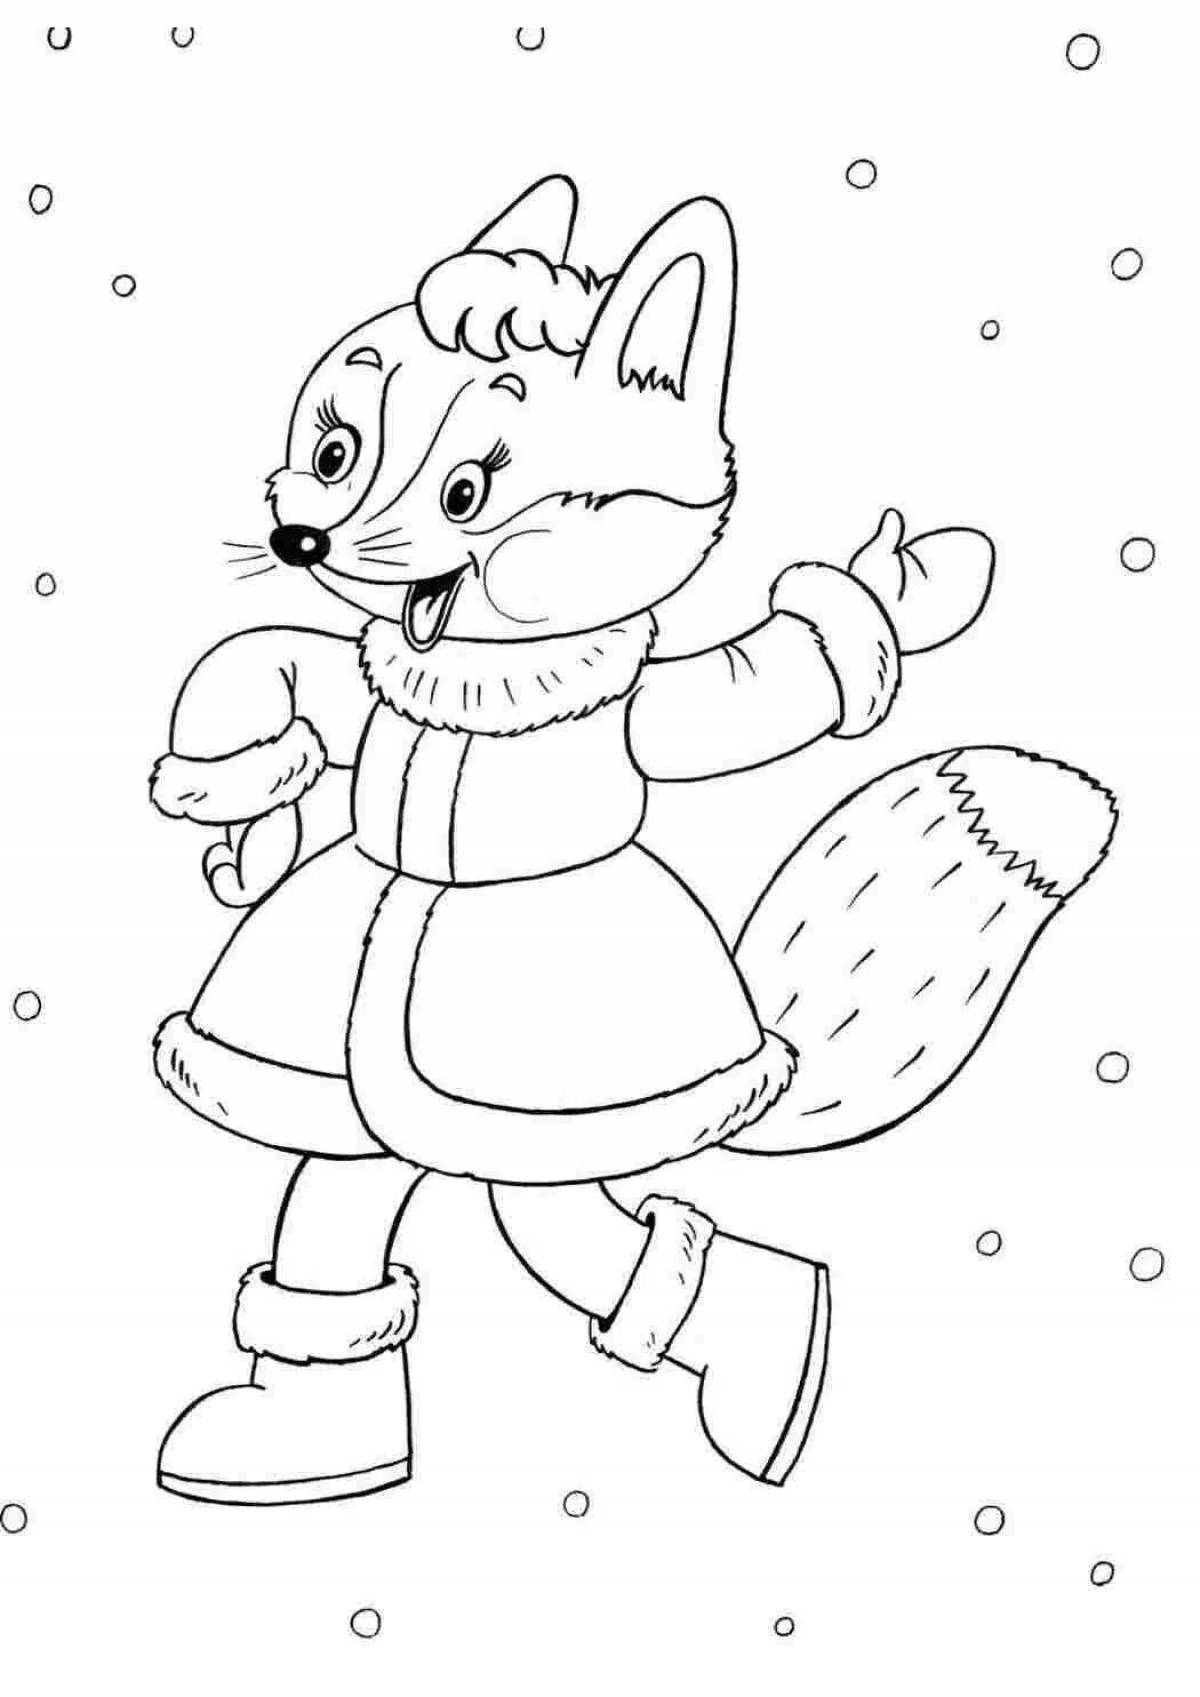 Adorable fox coloring book for kids 4-5 years old